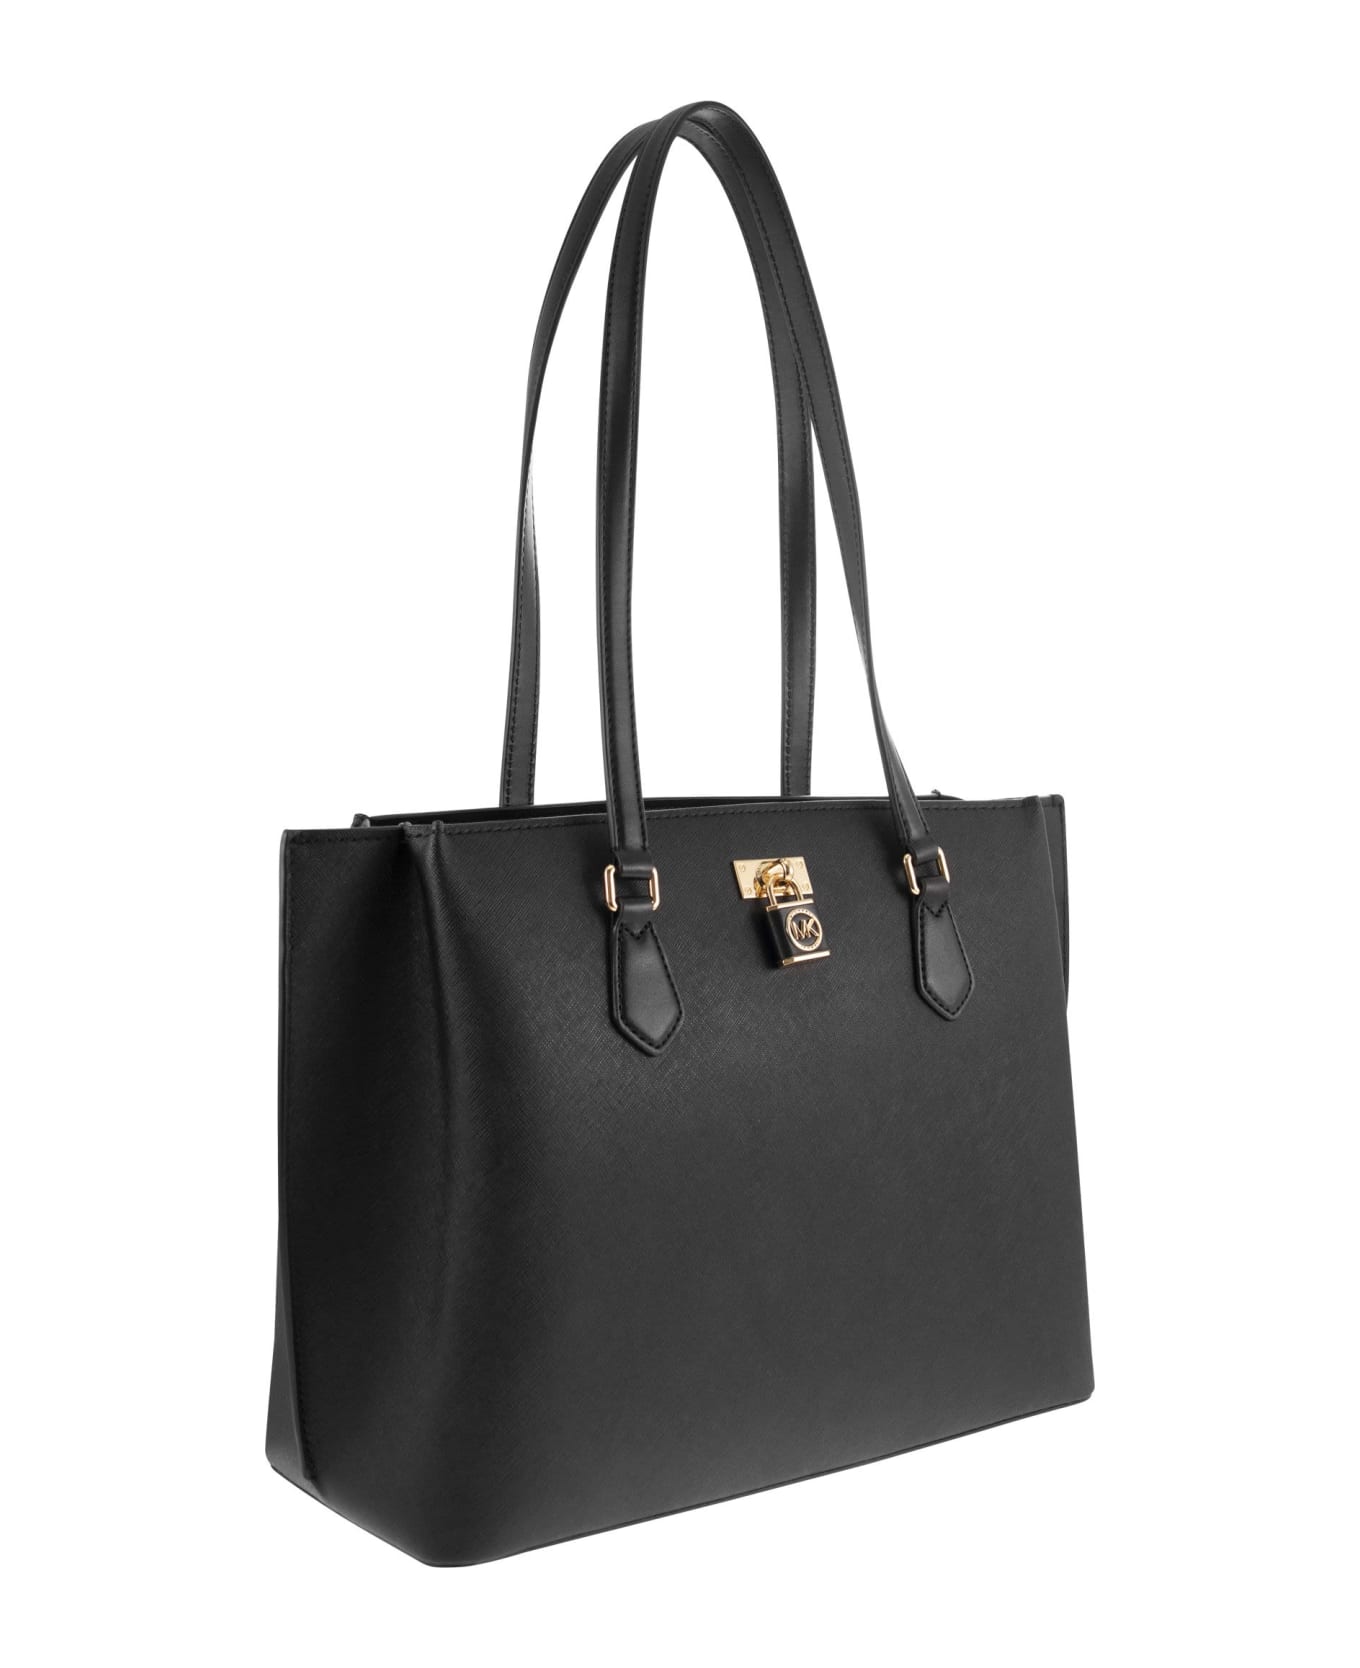 MICHAEL Michael Kors Ruby Leather Tote - Black トートバッグ